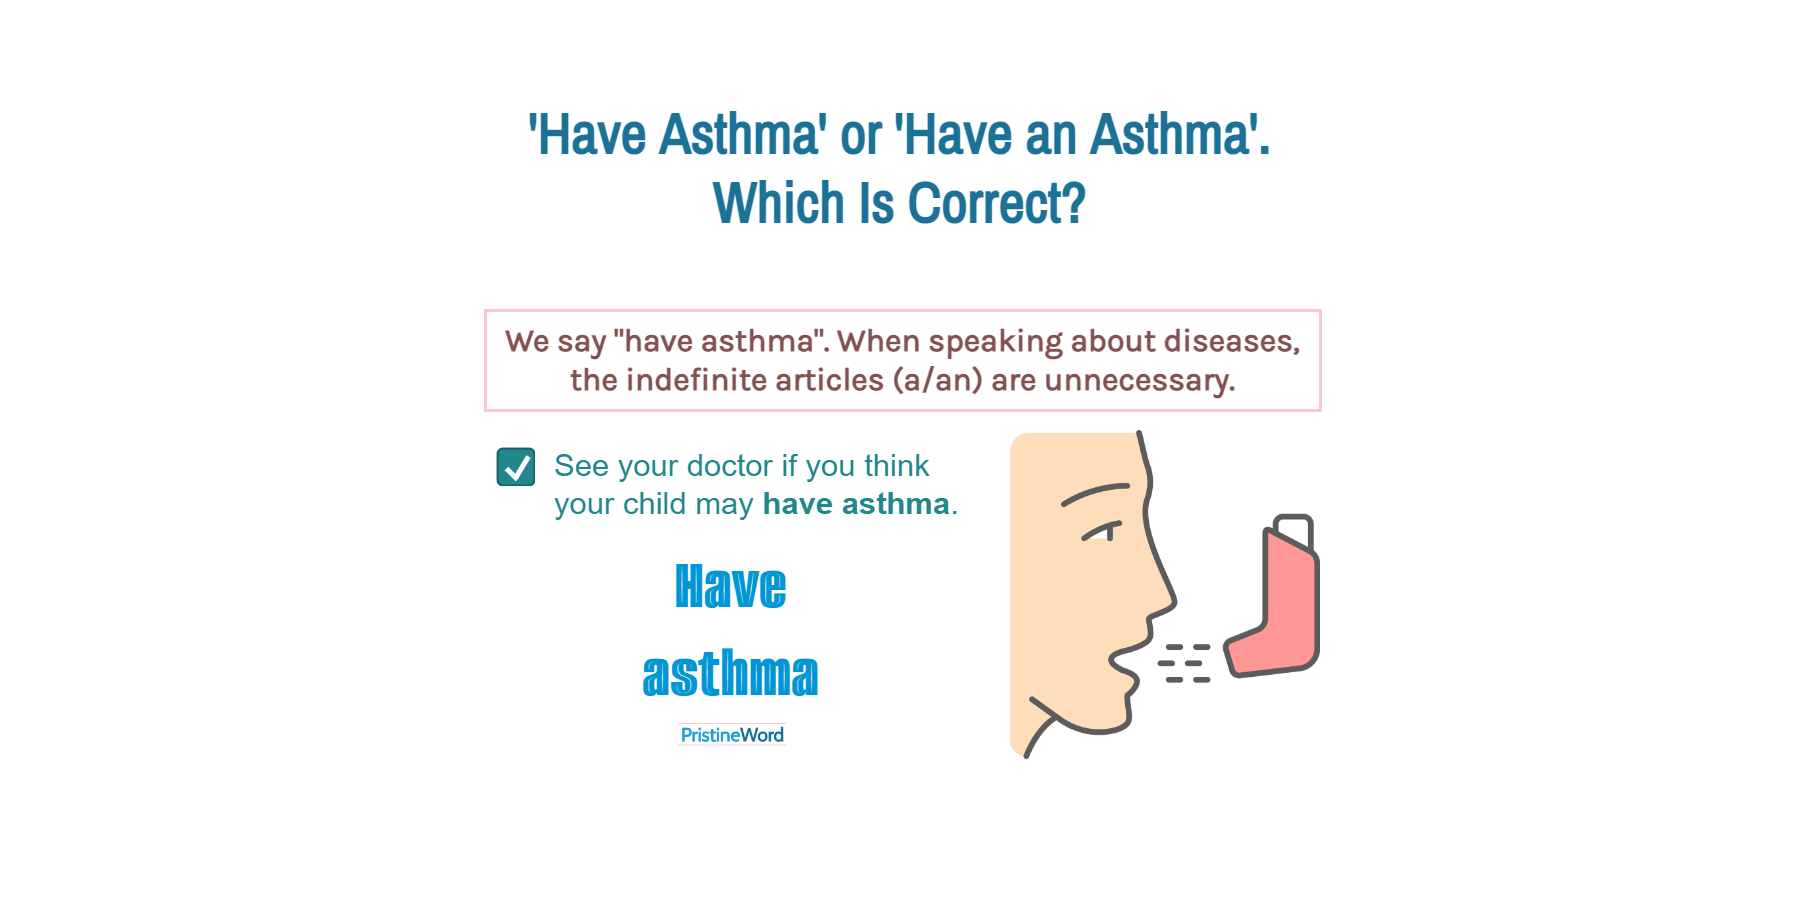 Have Asthma or Have an Asthma. Which Is Correct?